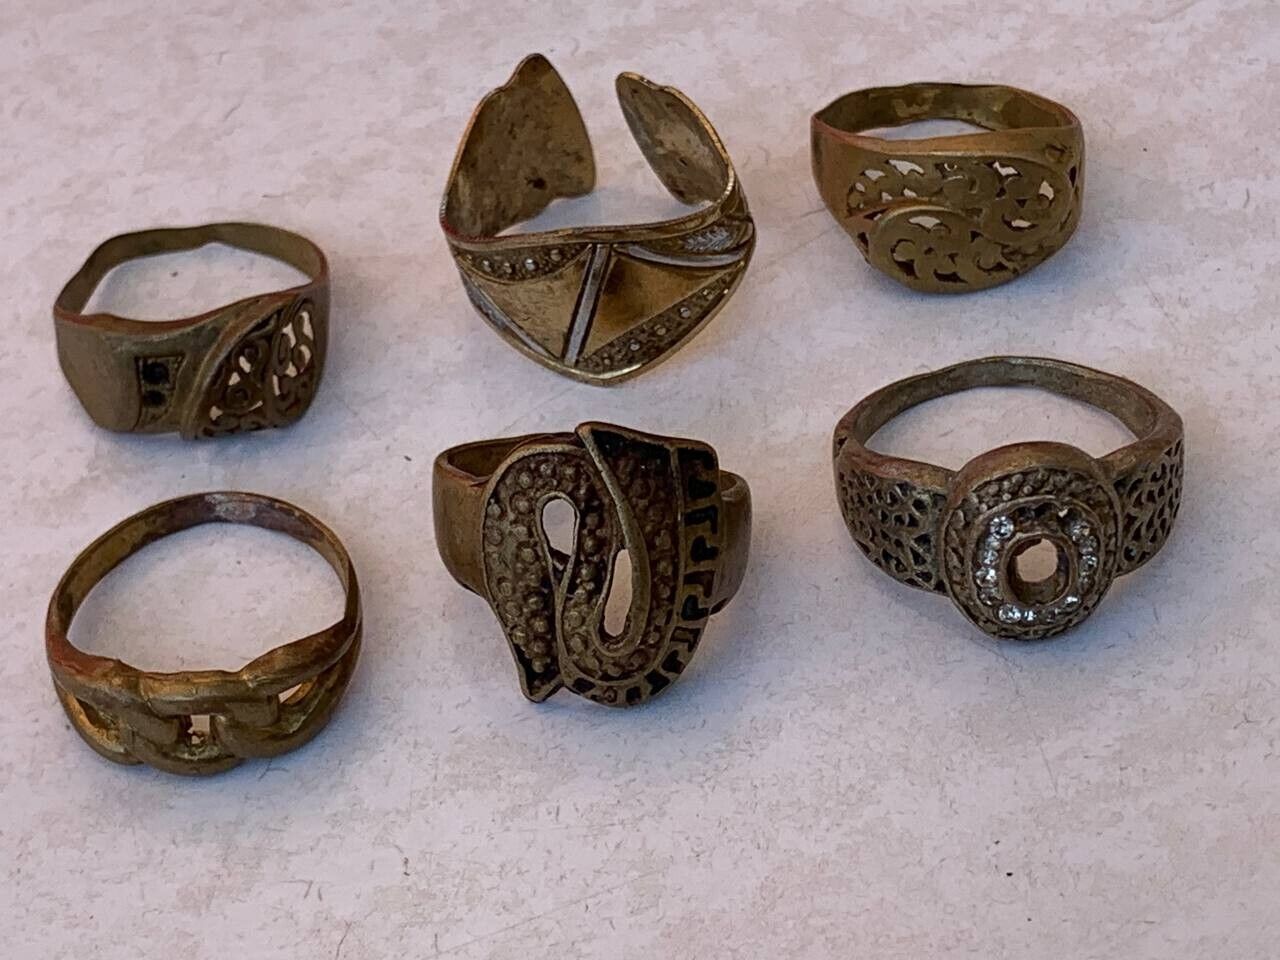 LOT OF 6 ANCIENT ROMAN TO MEDIEVAL BRONZE RINGS AUTHENTIC ANCIENT ARTIFACTS